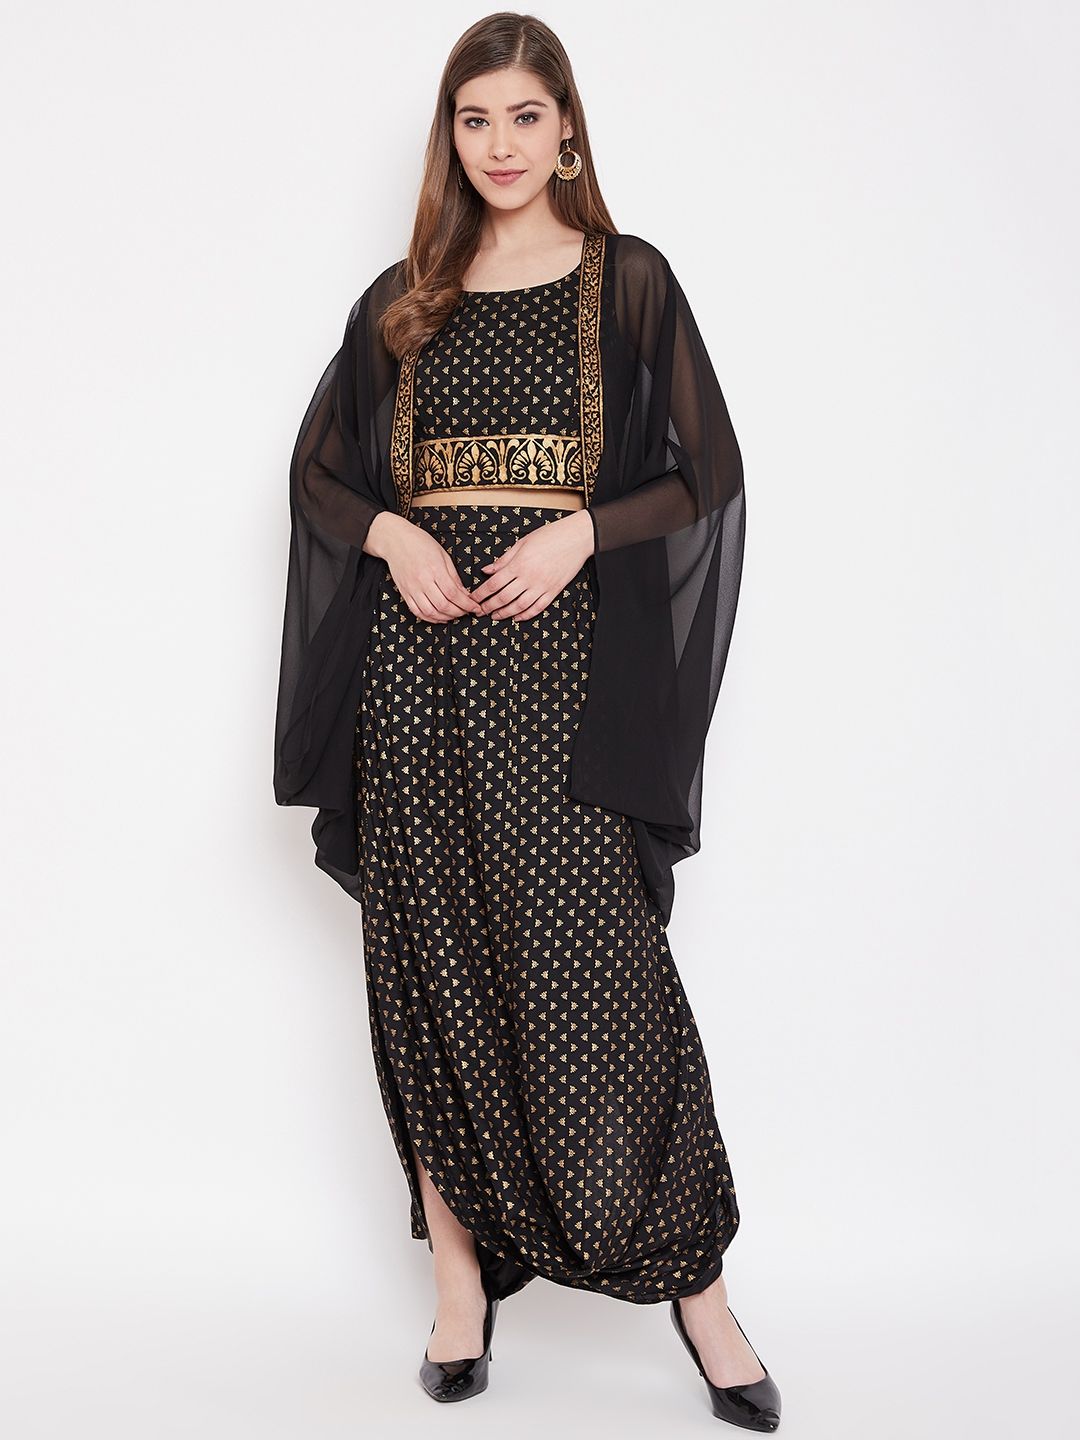 MABISH by Sonal Jain Women Black Solid Open Front Sheer Shrug Price in India